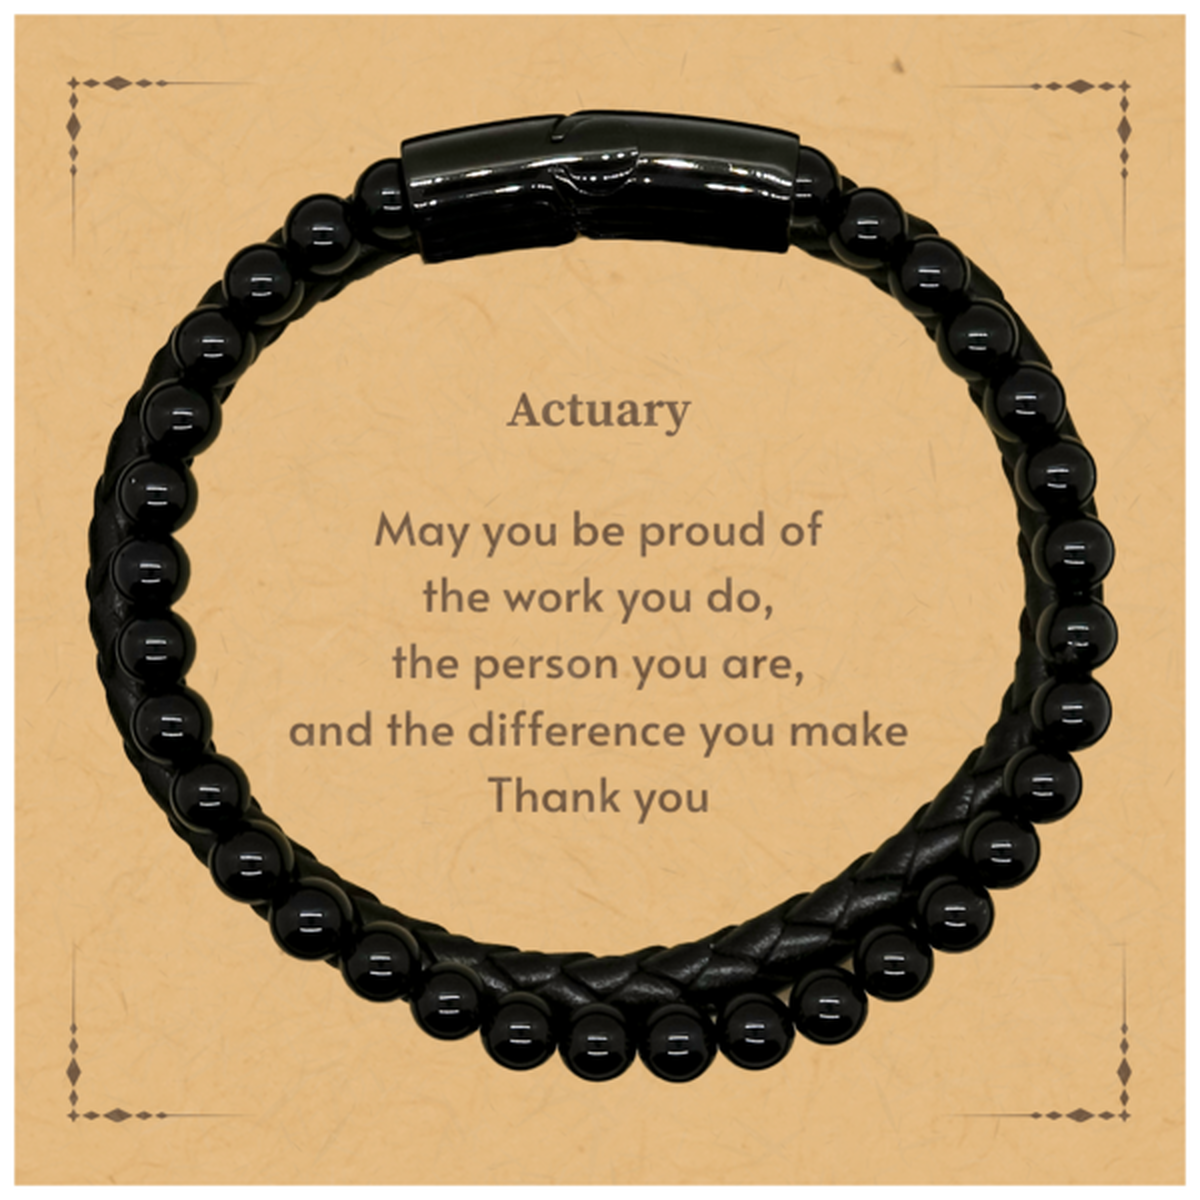 Heartwarming Stone Leather Bracelets Retirement Coworkers Gifts for Actuary, Actuary May You be proud of the work you do, the person you are Gifts for Boss Men Women Friends